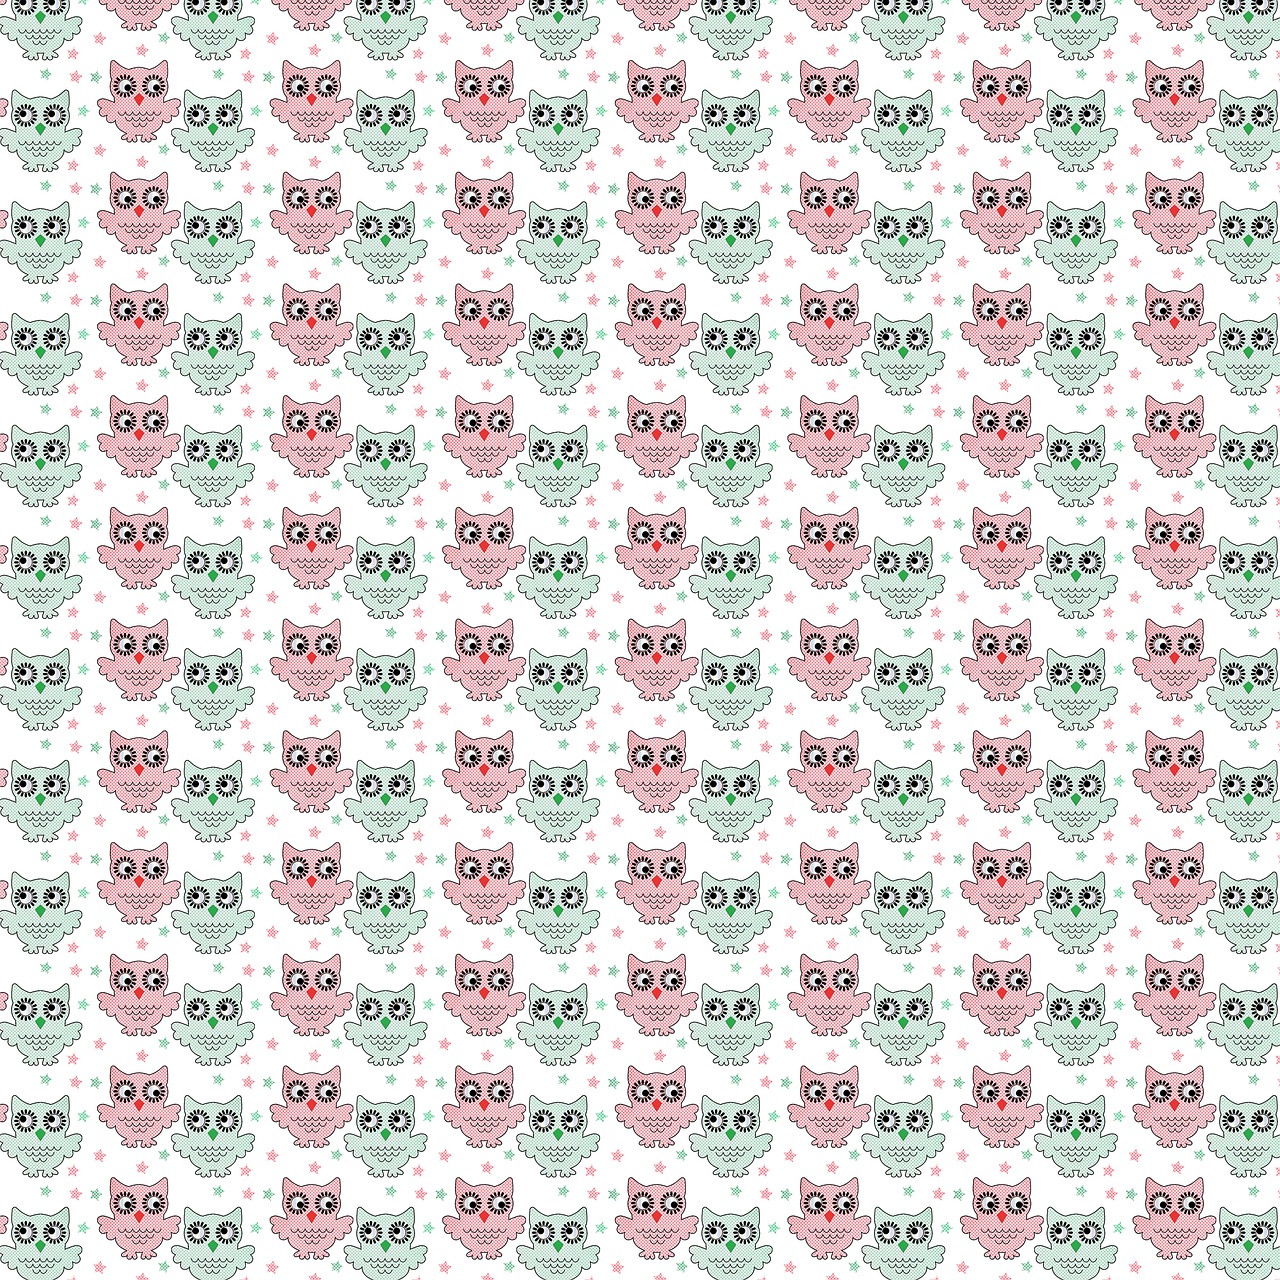 a pink and green owl pattern on a white background, a digital rendering, inspired by Louis Wain, tumblr, cutecore, ghost faces, spritesheet, cozy wallpaper